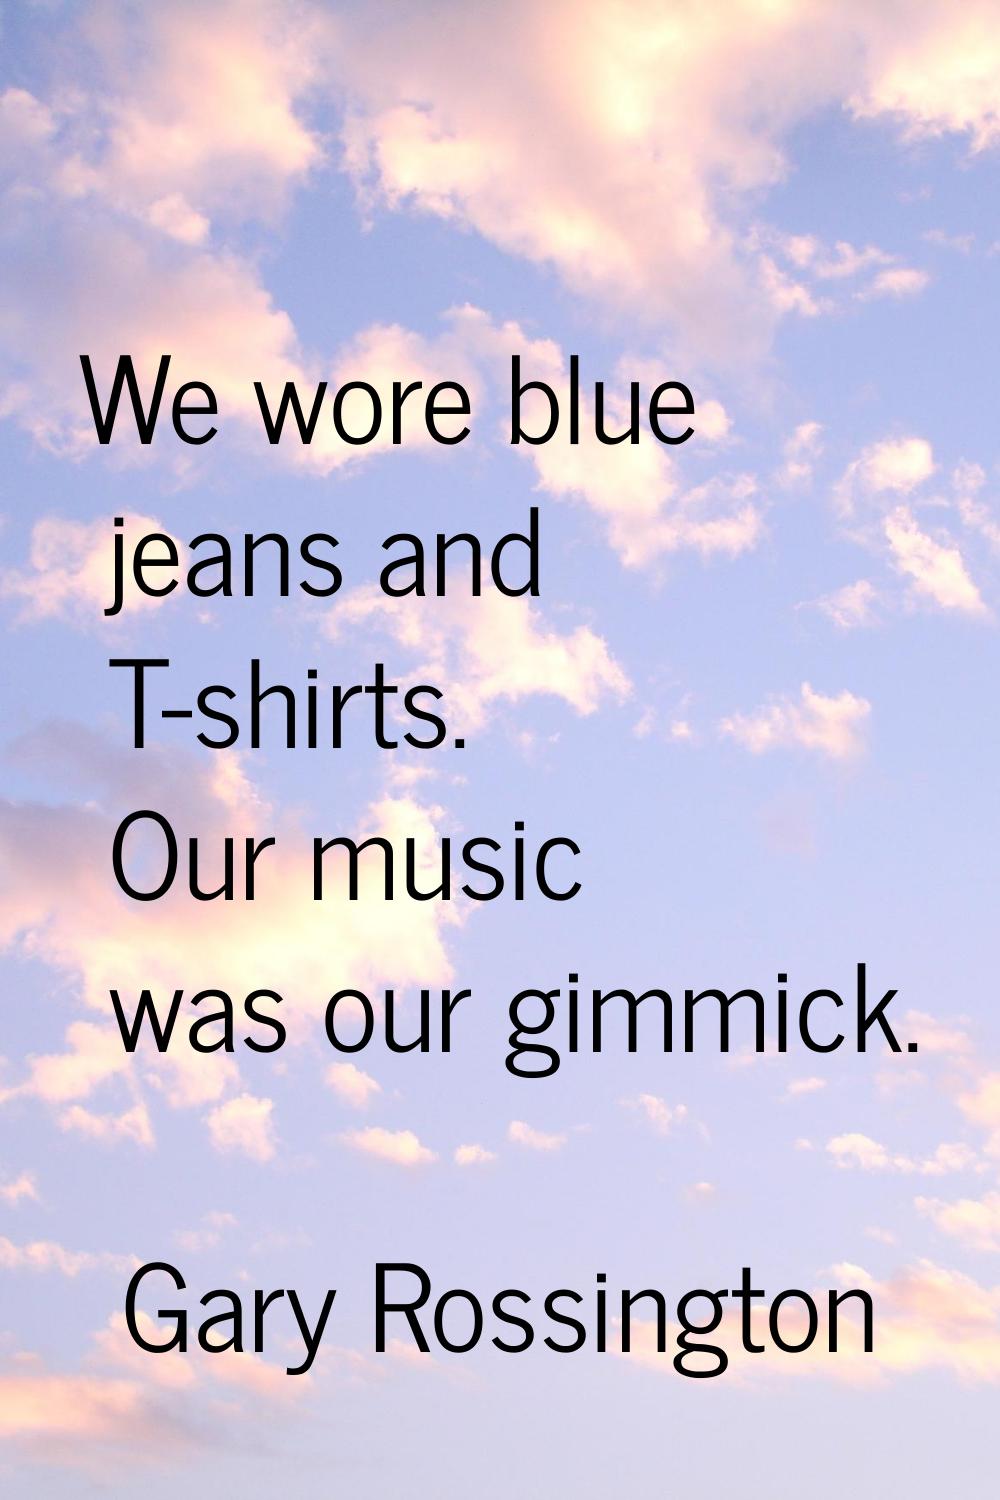 We wore blue jeans and T-shirts. Our music was our gimmick.